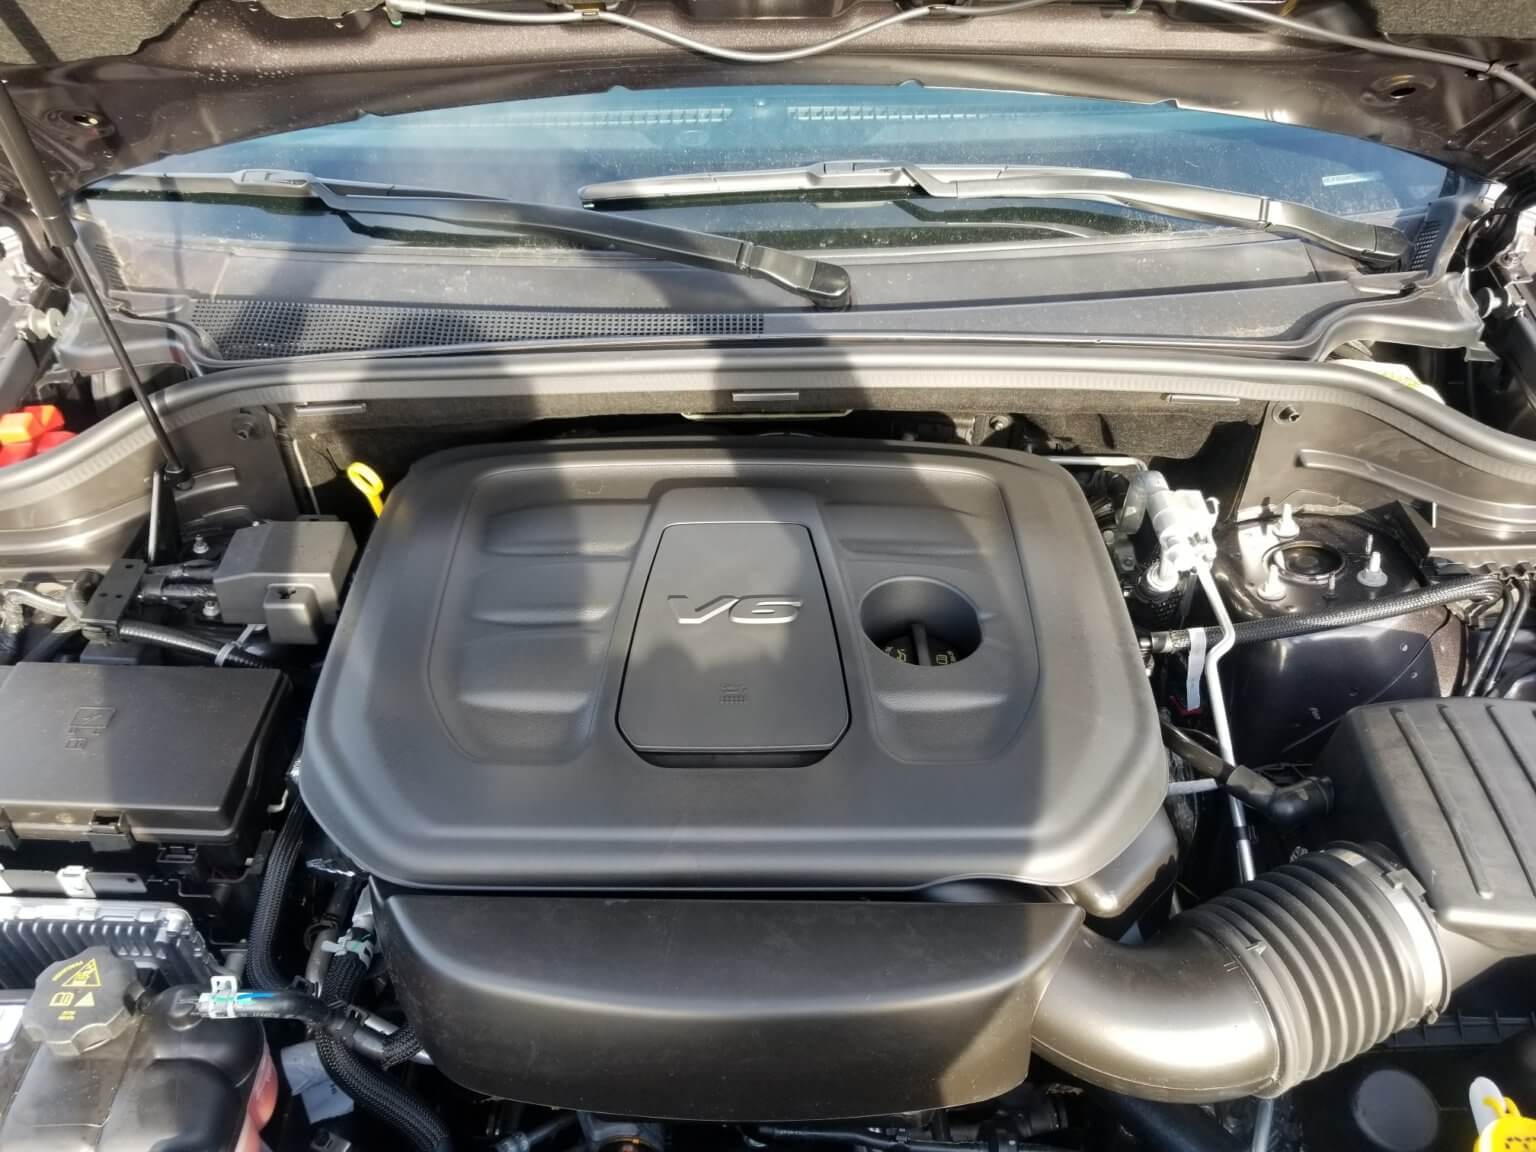 Jeep Grand Cherokee Oil Change (2016+ 3.6L) The Weekend